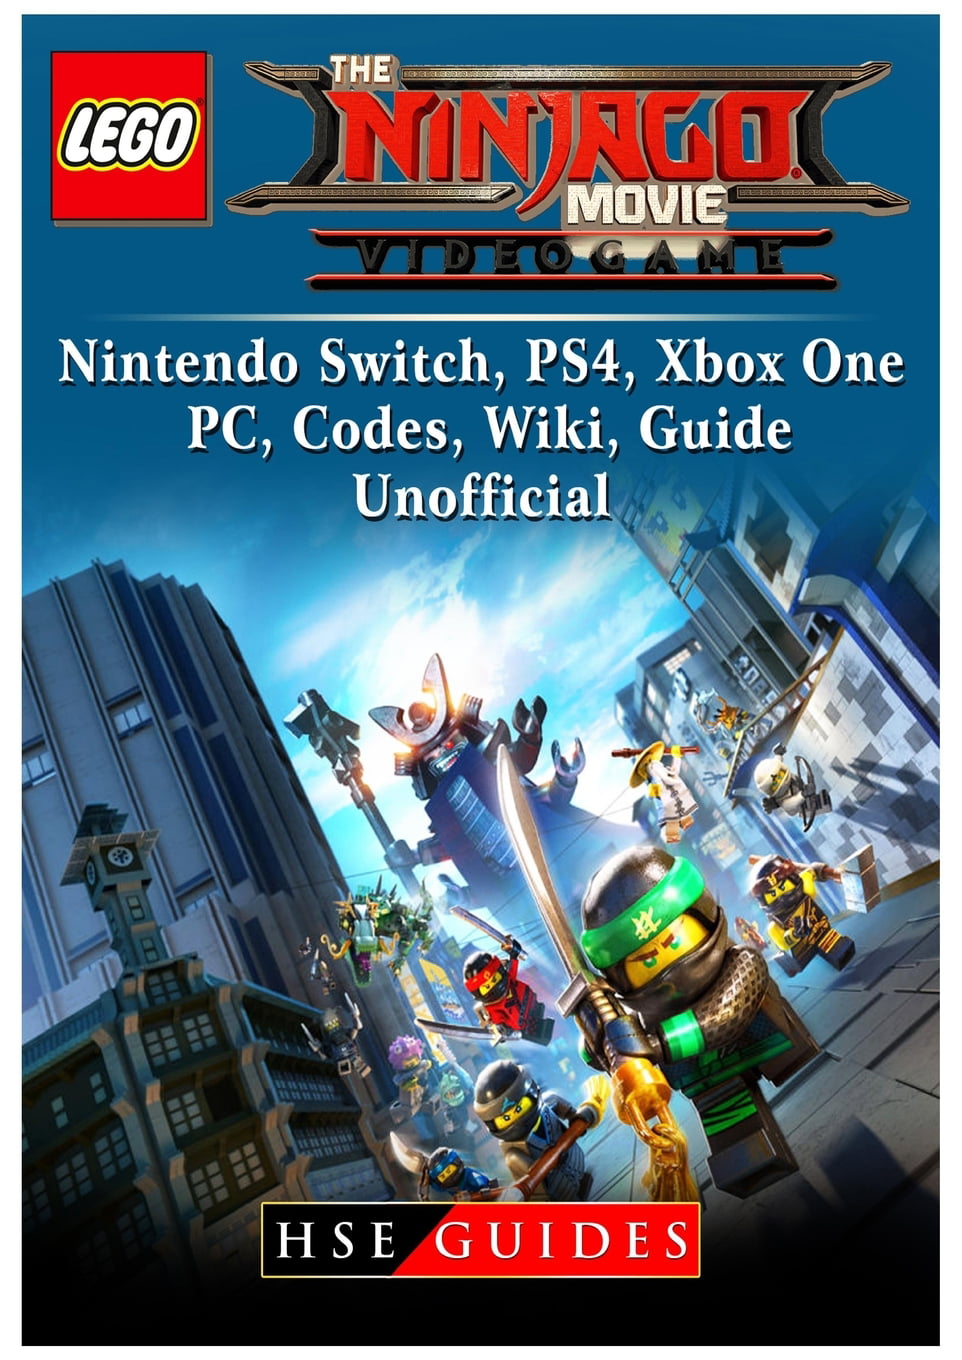 The Lego Ninjago Movie Video Game, Nintendo Switch, Ps4, One, Pc, Codes, Guide - Walmart.com